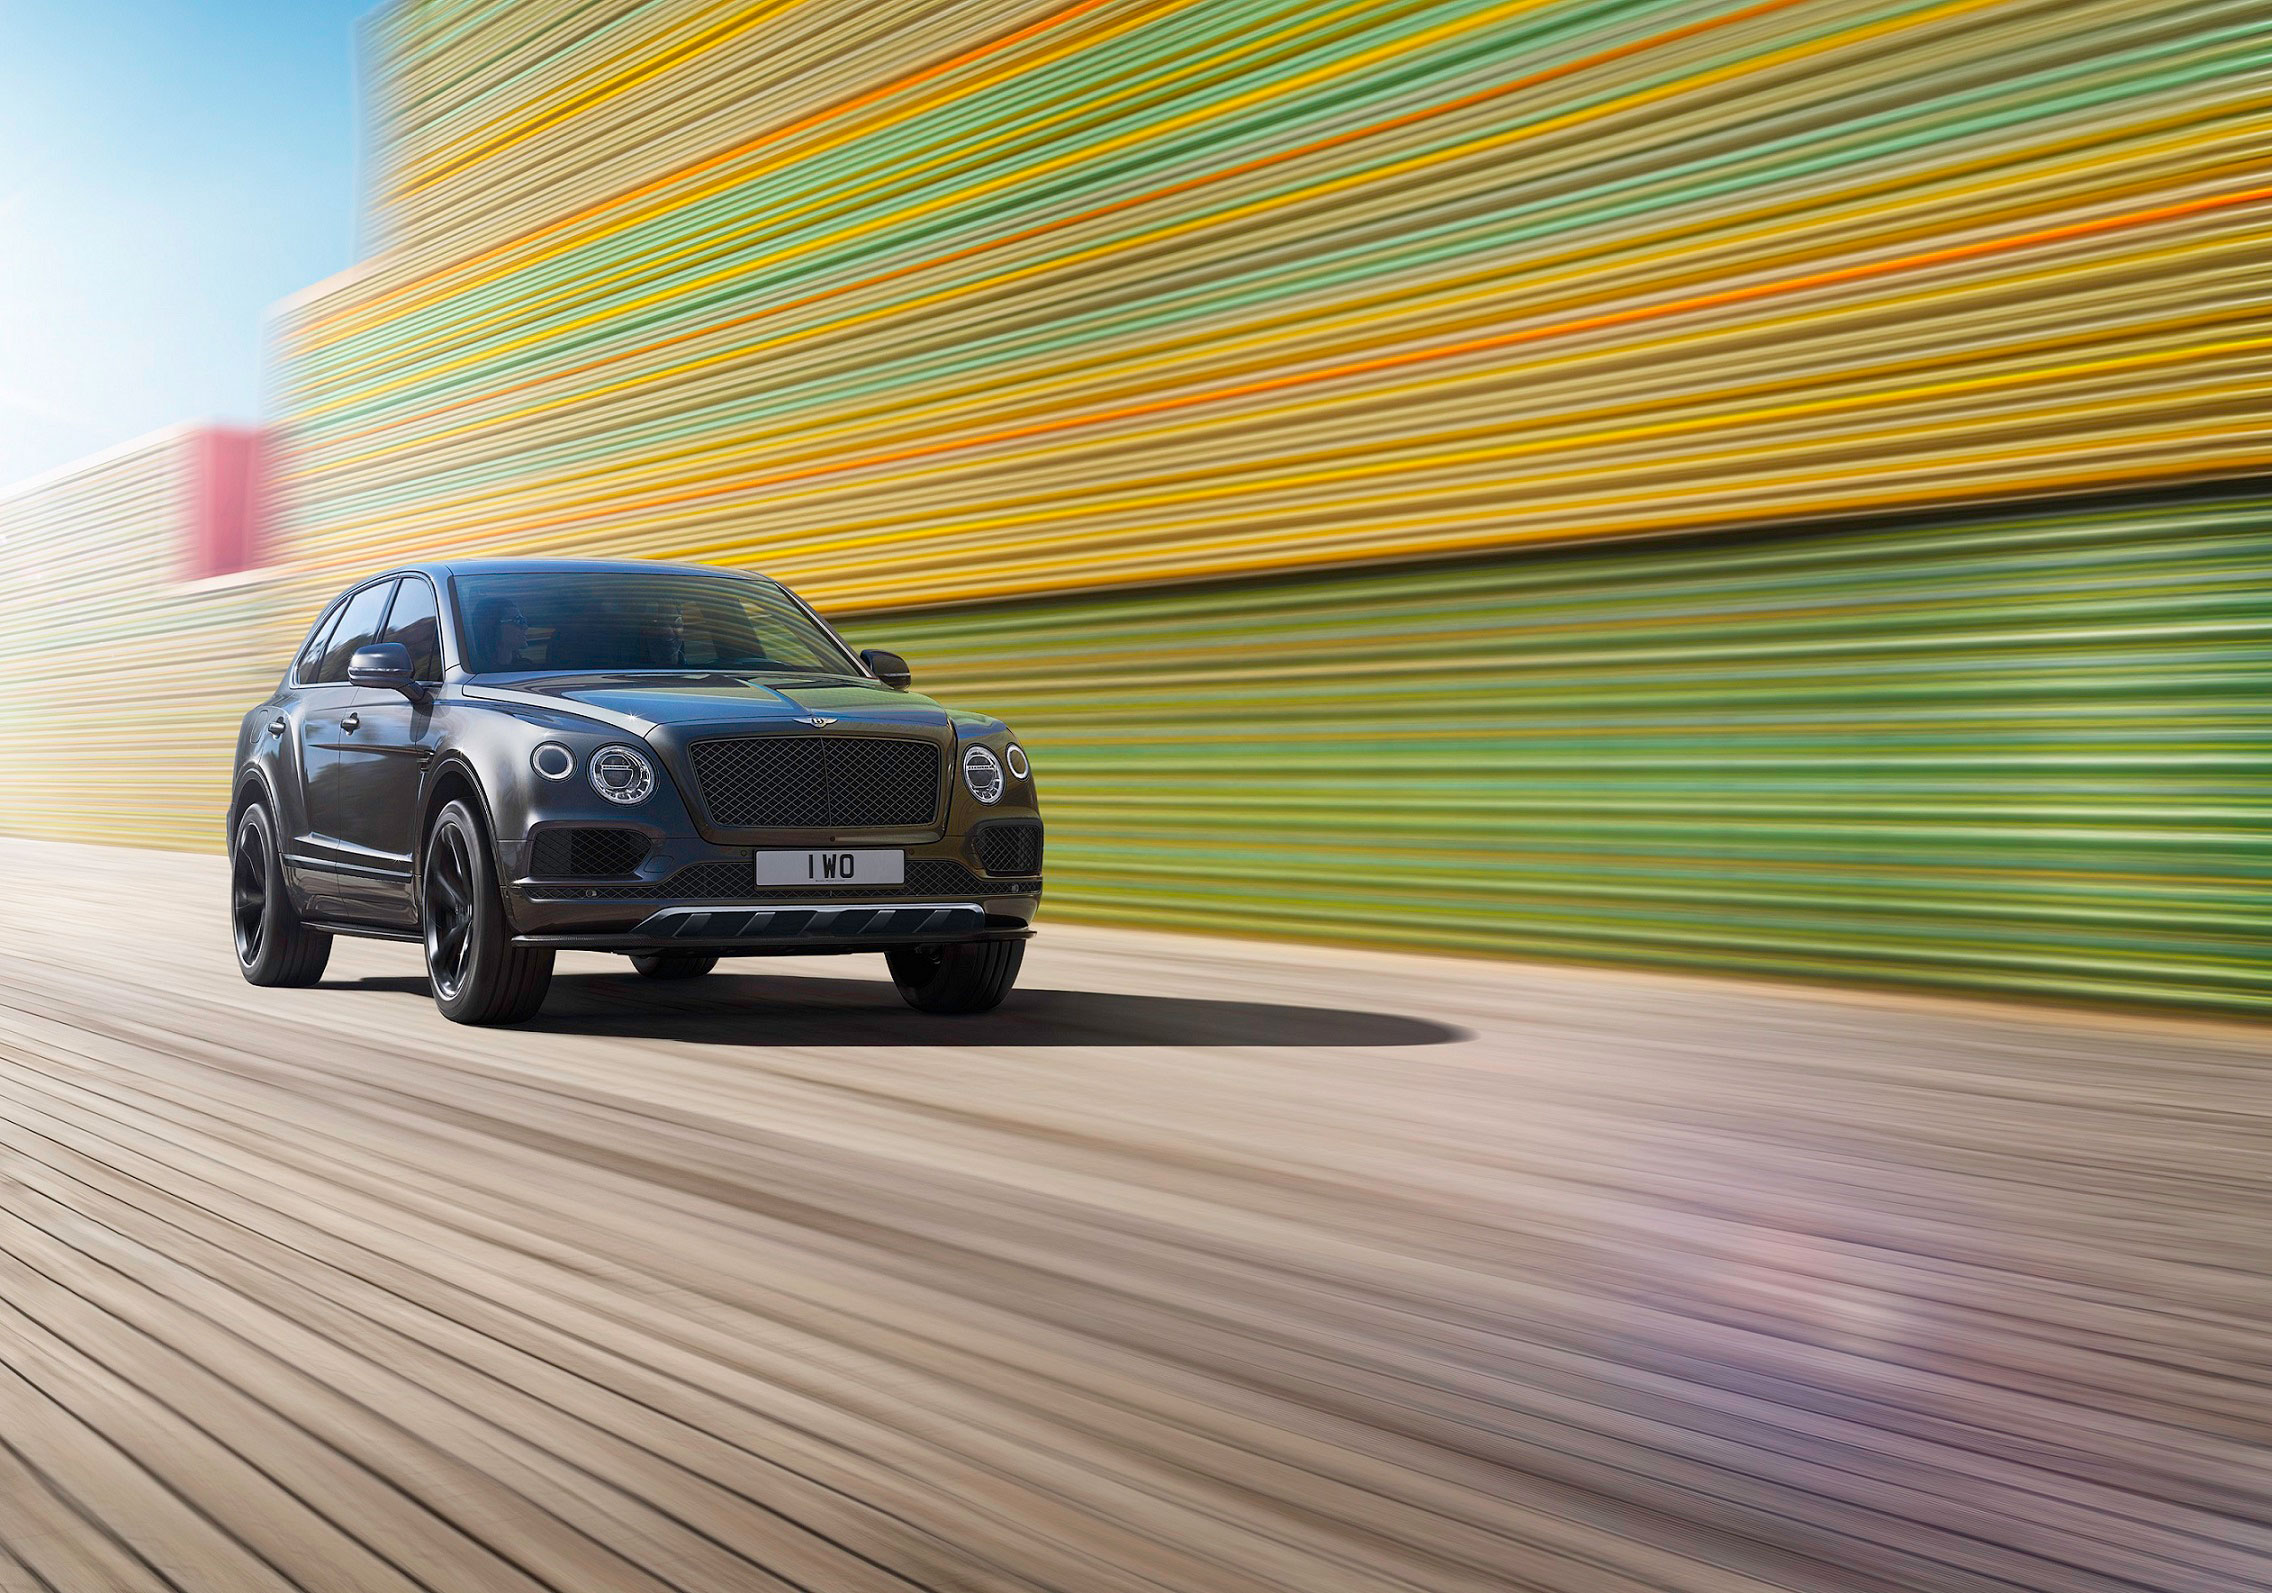 The Bentley Bentayga Black Specification: Designed for the Middle East